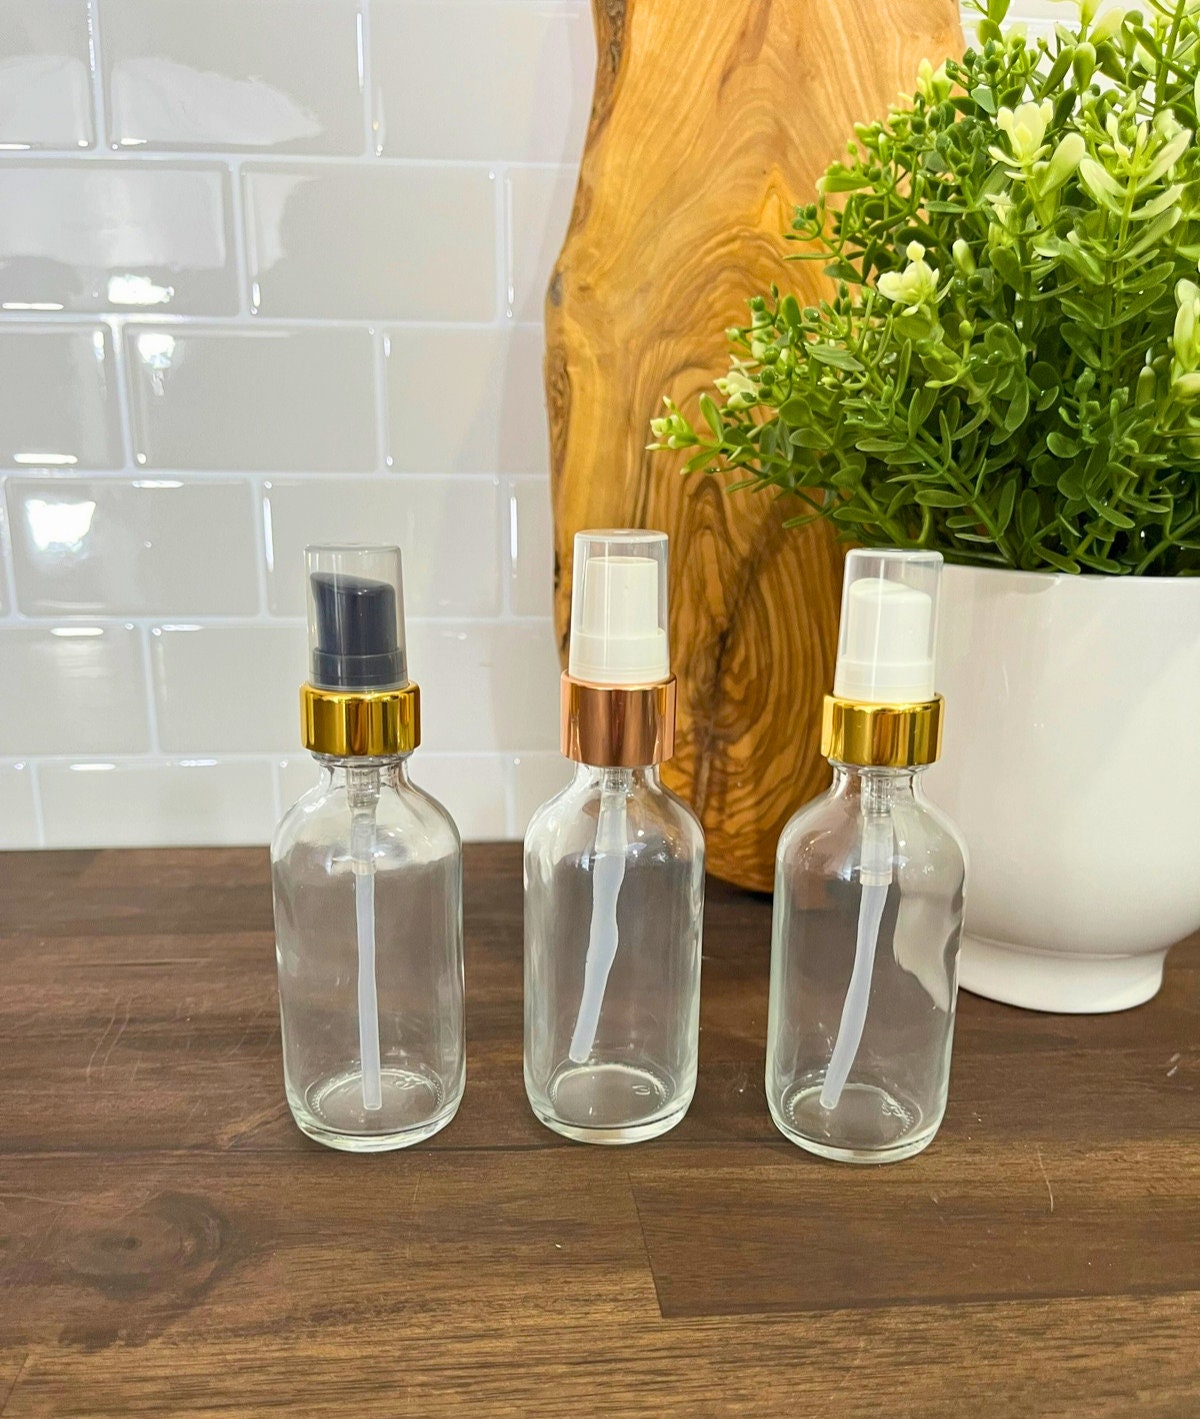 24 Pieces 60ml 2OZ Glass Bottles with Cork Stopper Spice Bottles